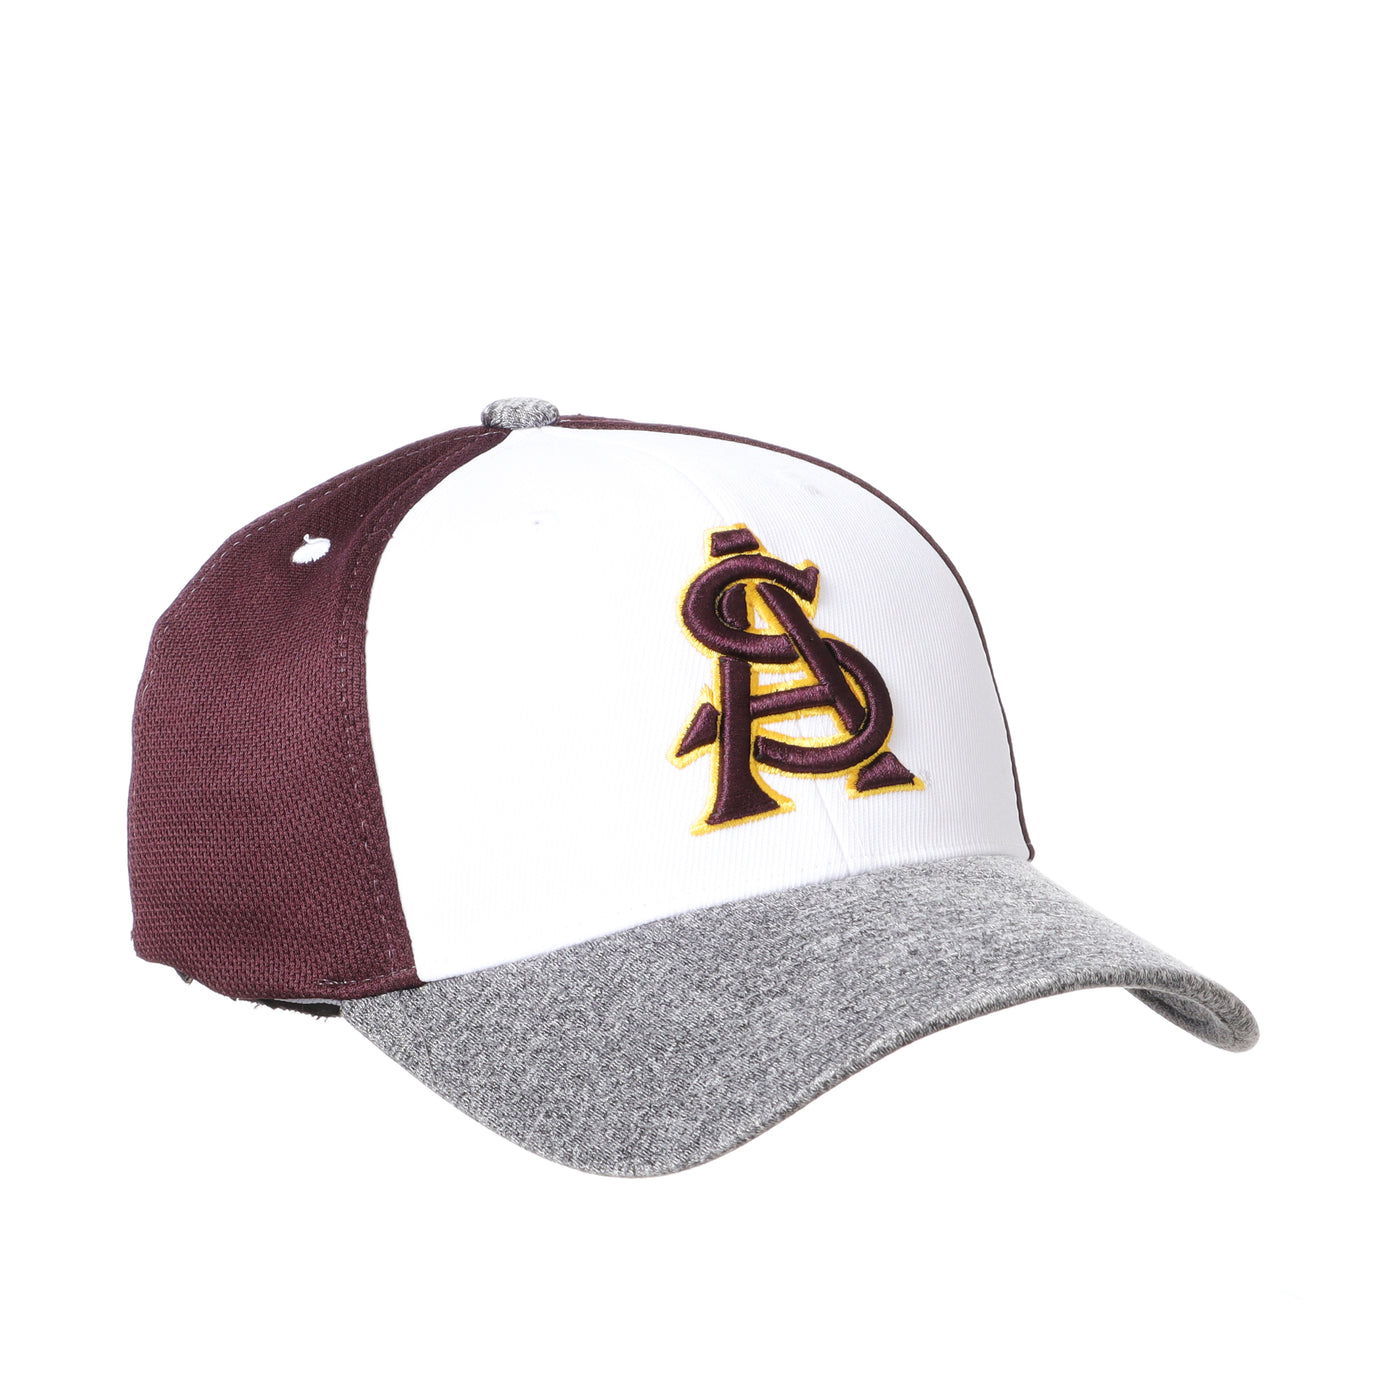 Side view of ASU toddler stretch fit hat in white, maroon, and gray with interlocking 'A' and 'S' in maroon and gold embroidered lettering 